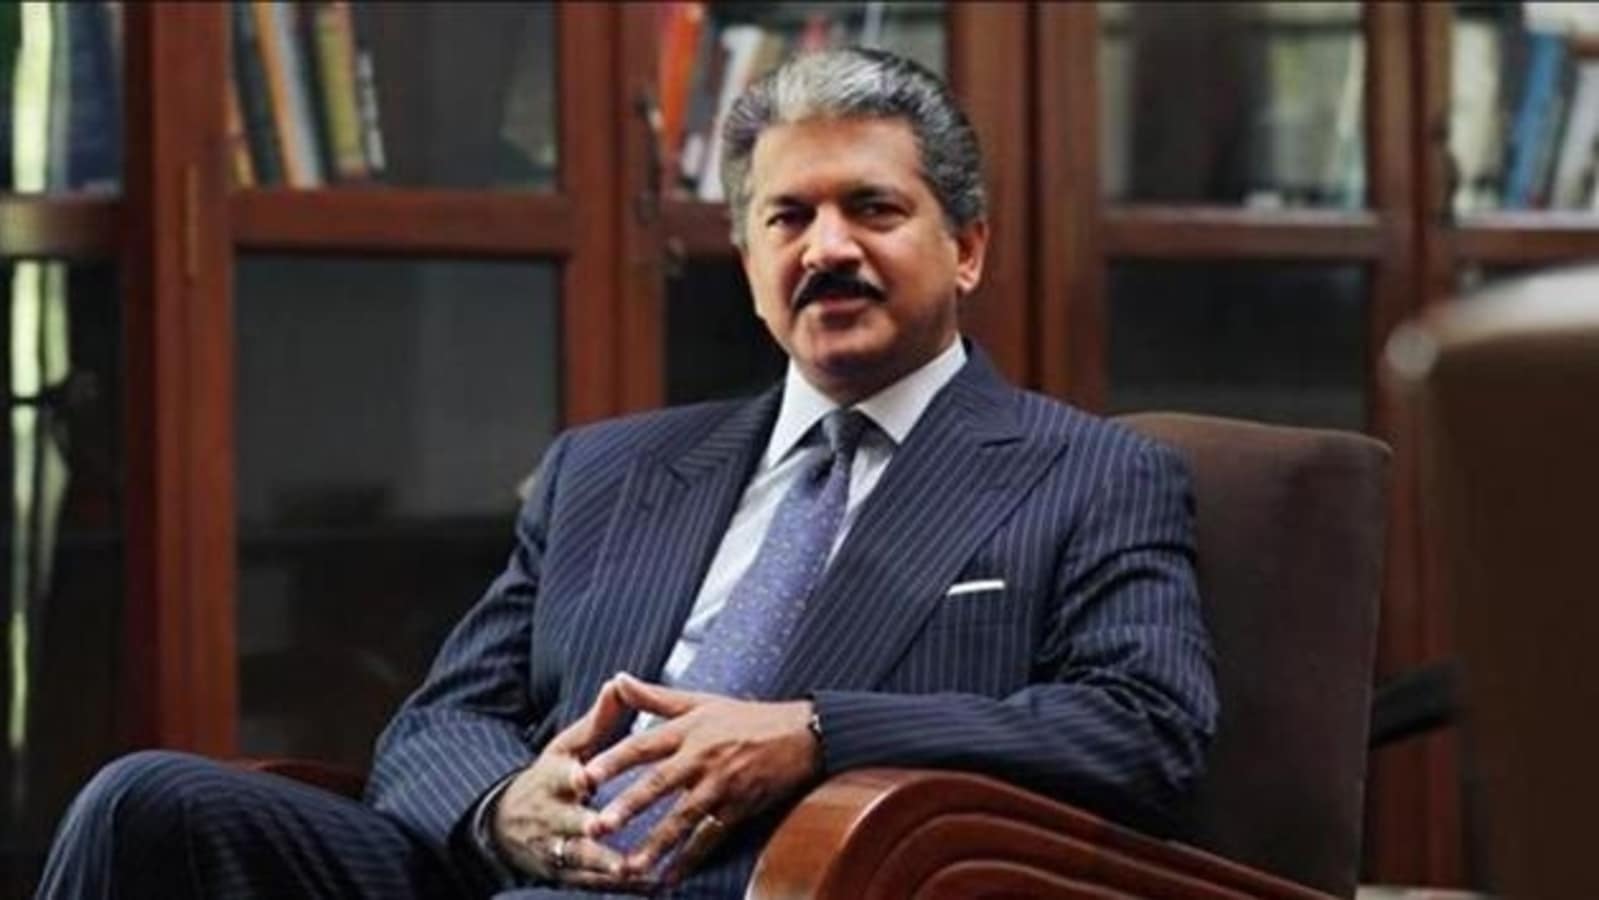 Anand Mahindra shares about ‘latest technology’ to dry clothes, amuses netizens